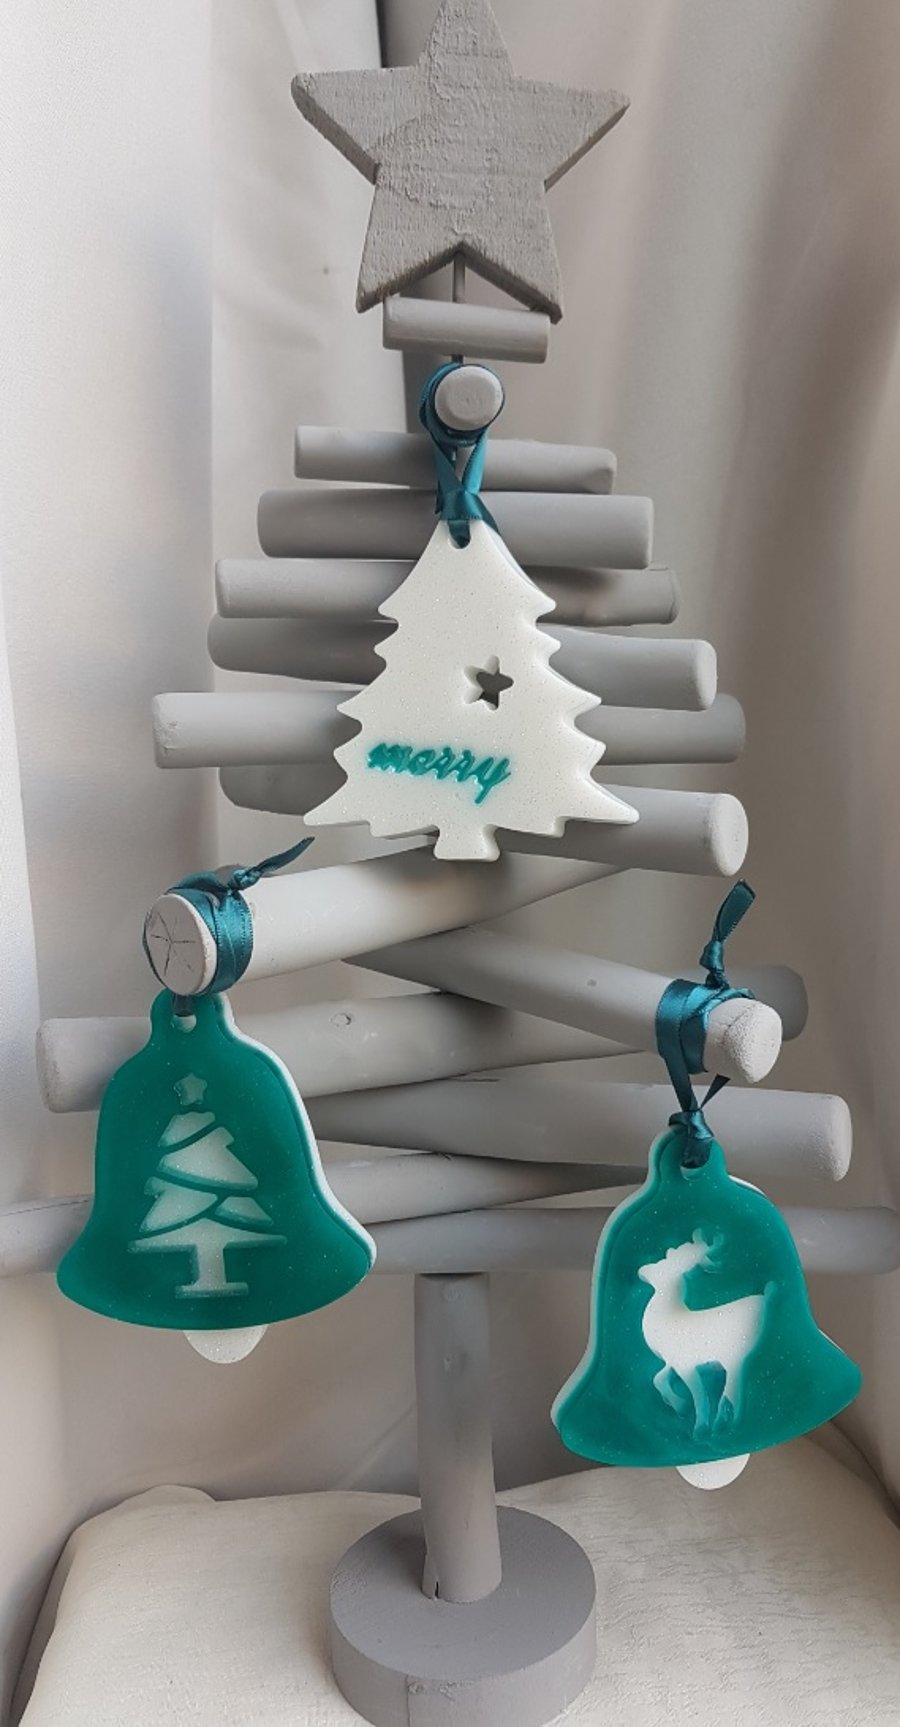 Set of 3 Resin Decorations - Turquoise and Glittery White.